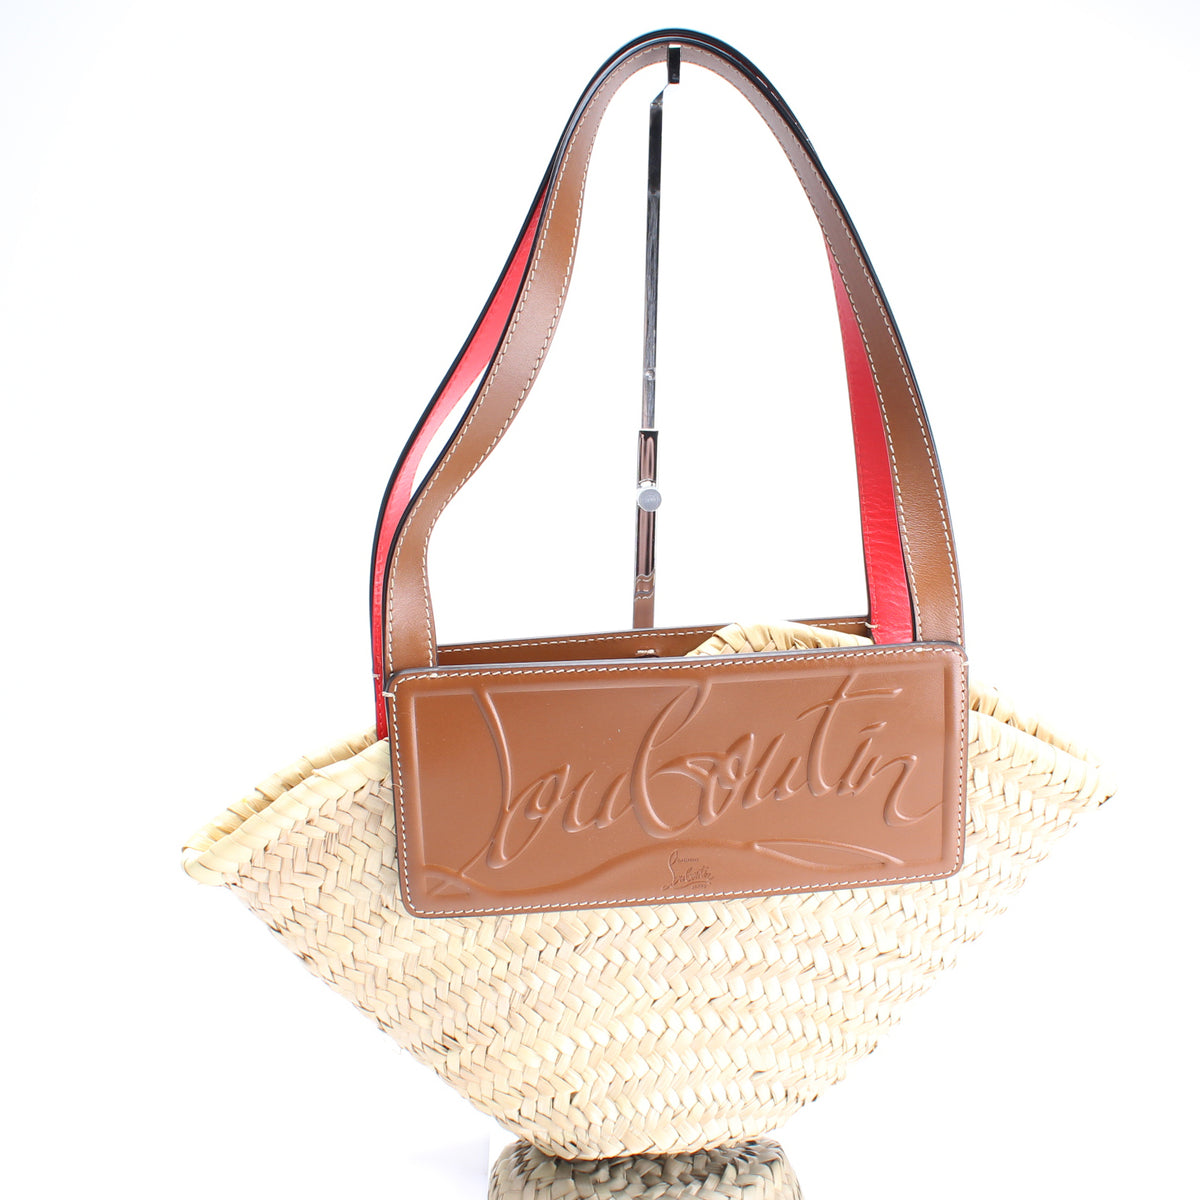 Loubishore leather tote